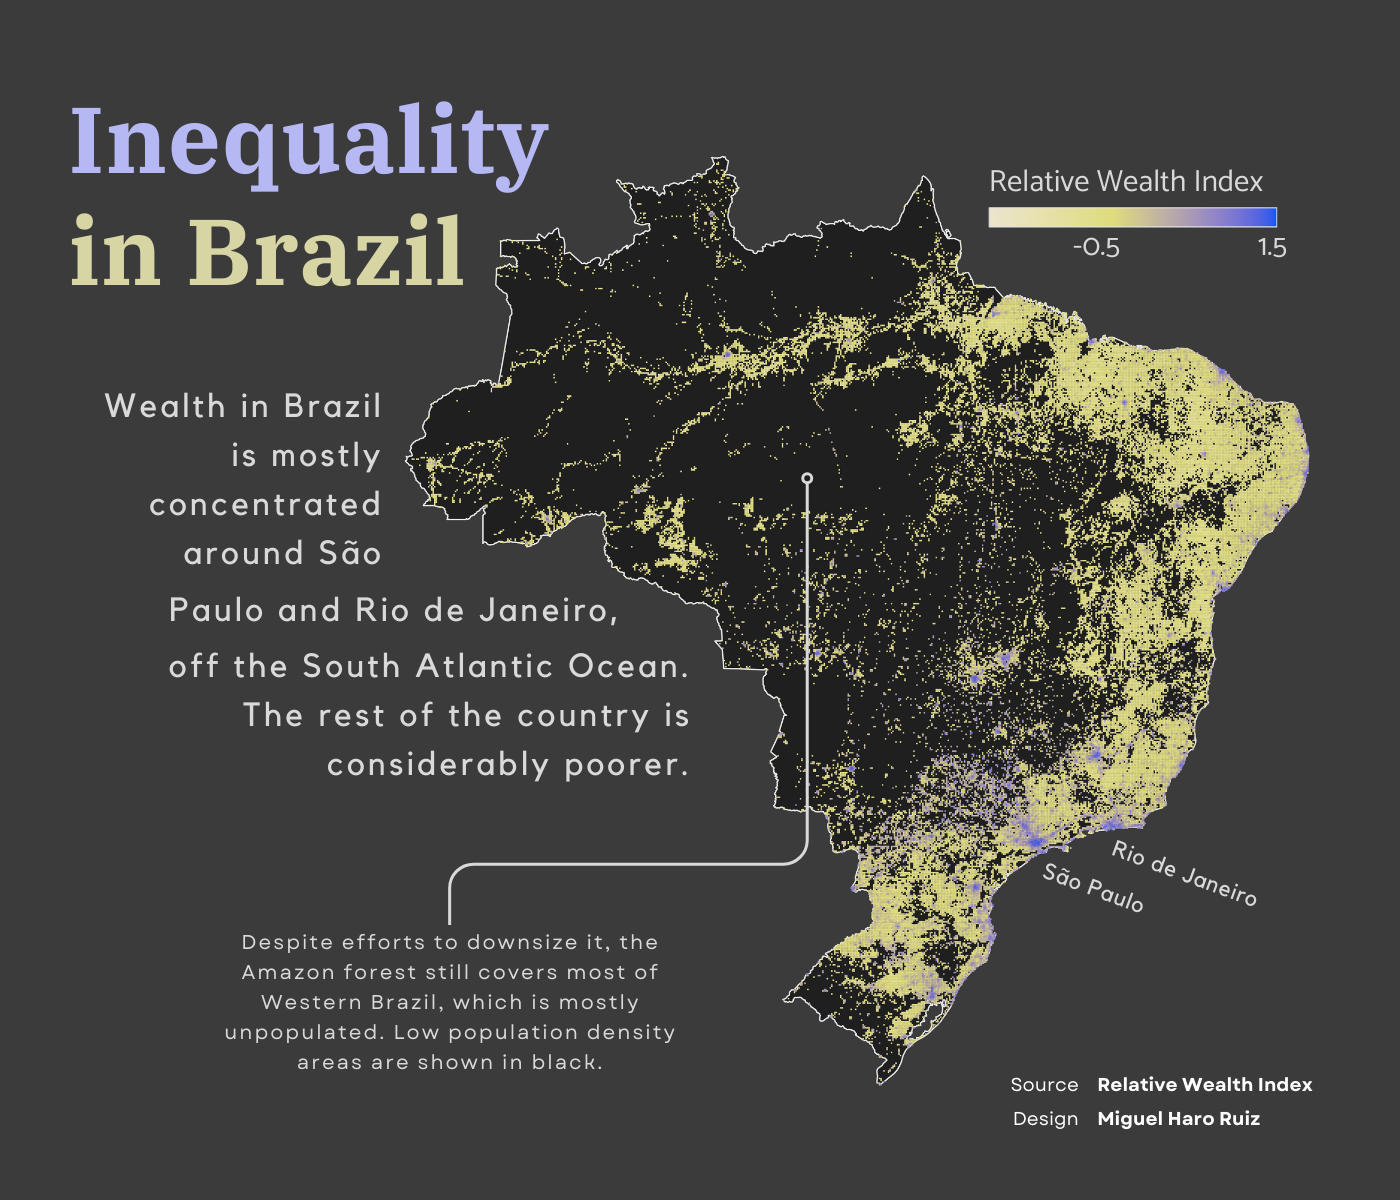 A map of brazil showing how wealth is concentraded in a few coastal cities in the east, wheareas the west is mostly unpopulated due to the amazon.